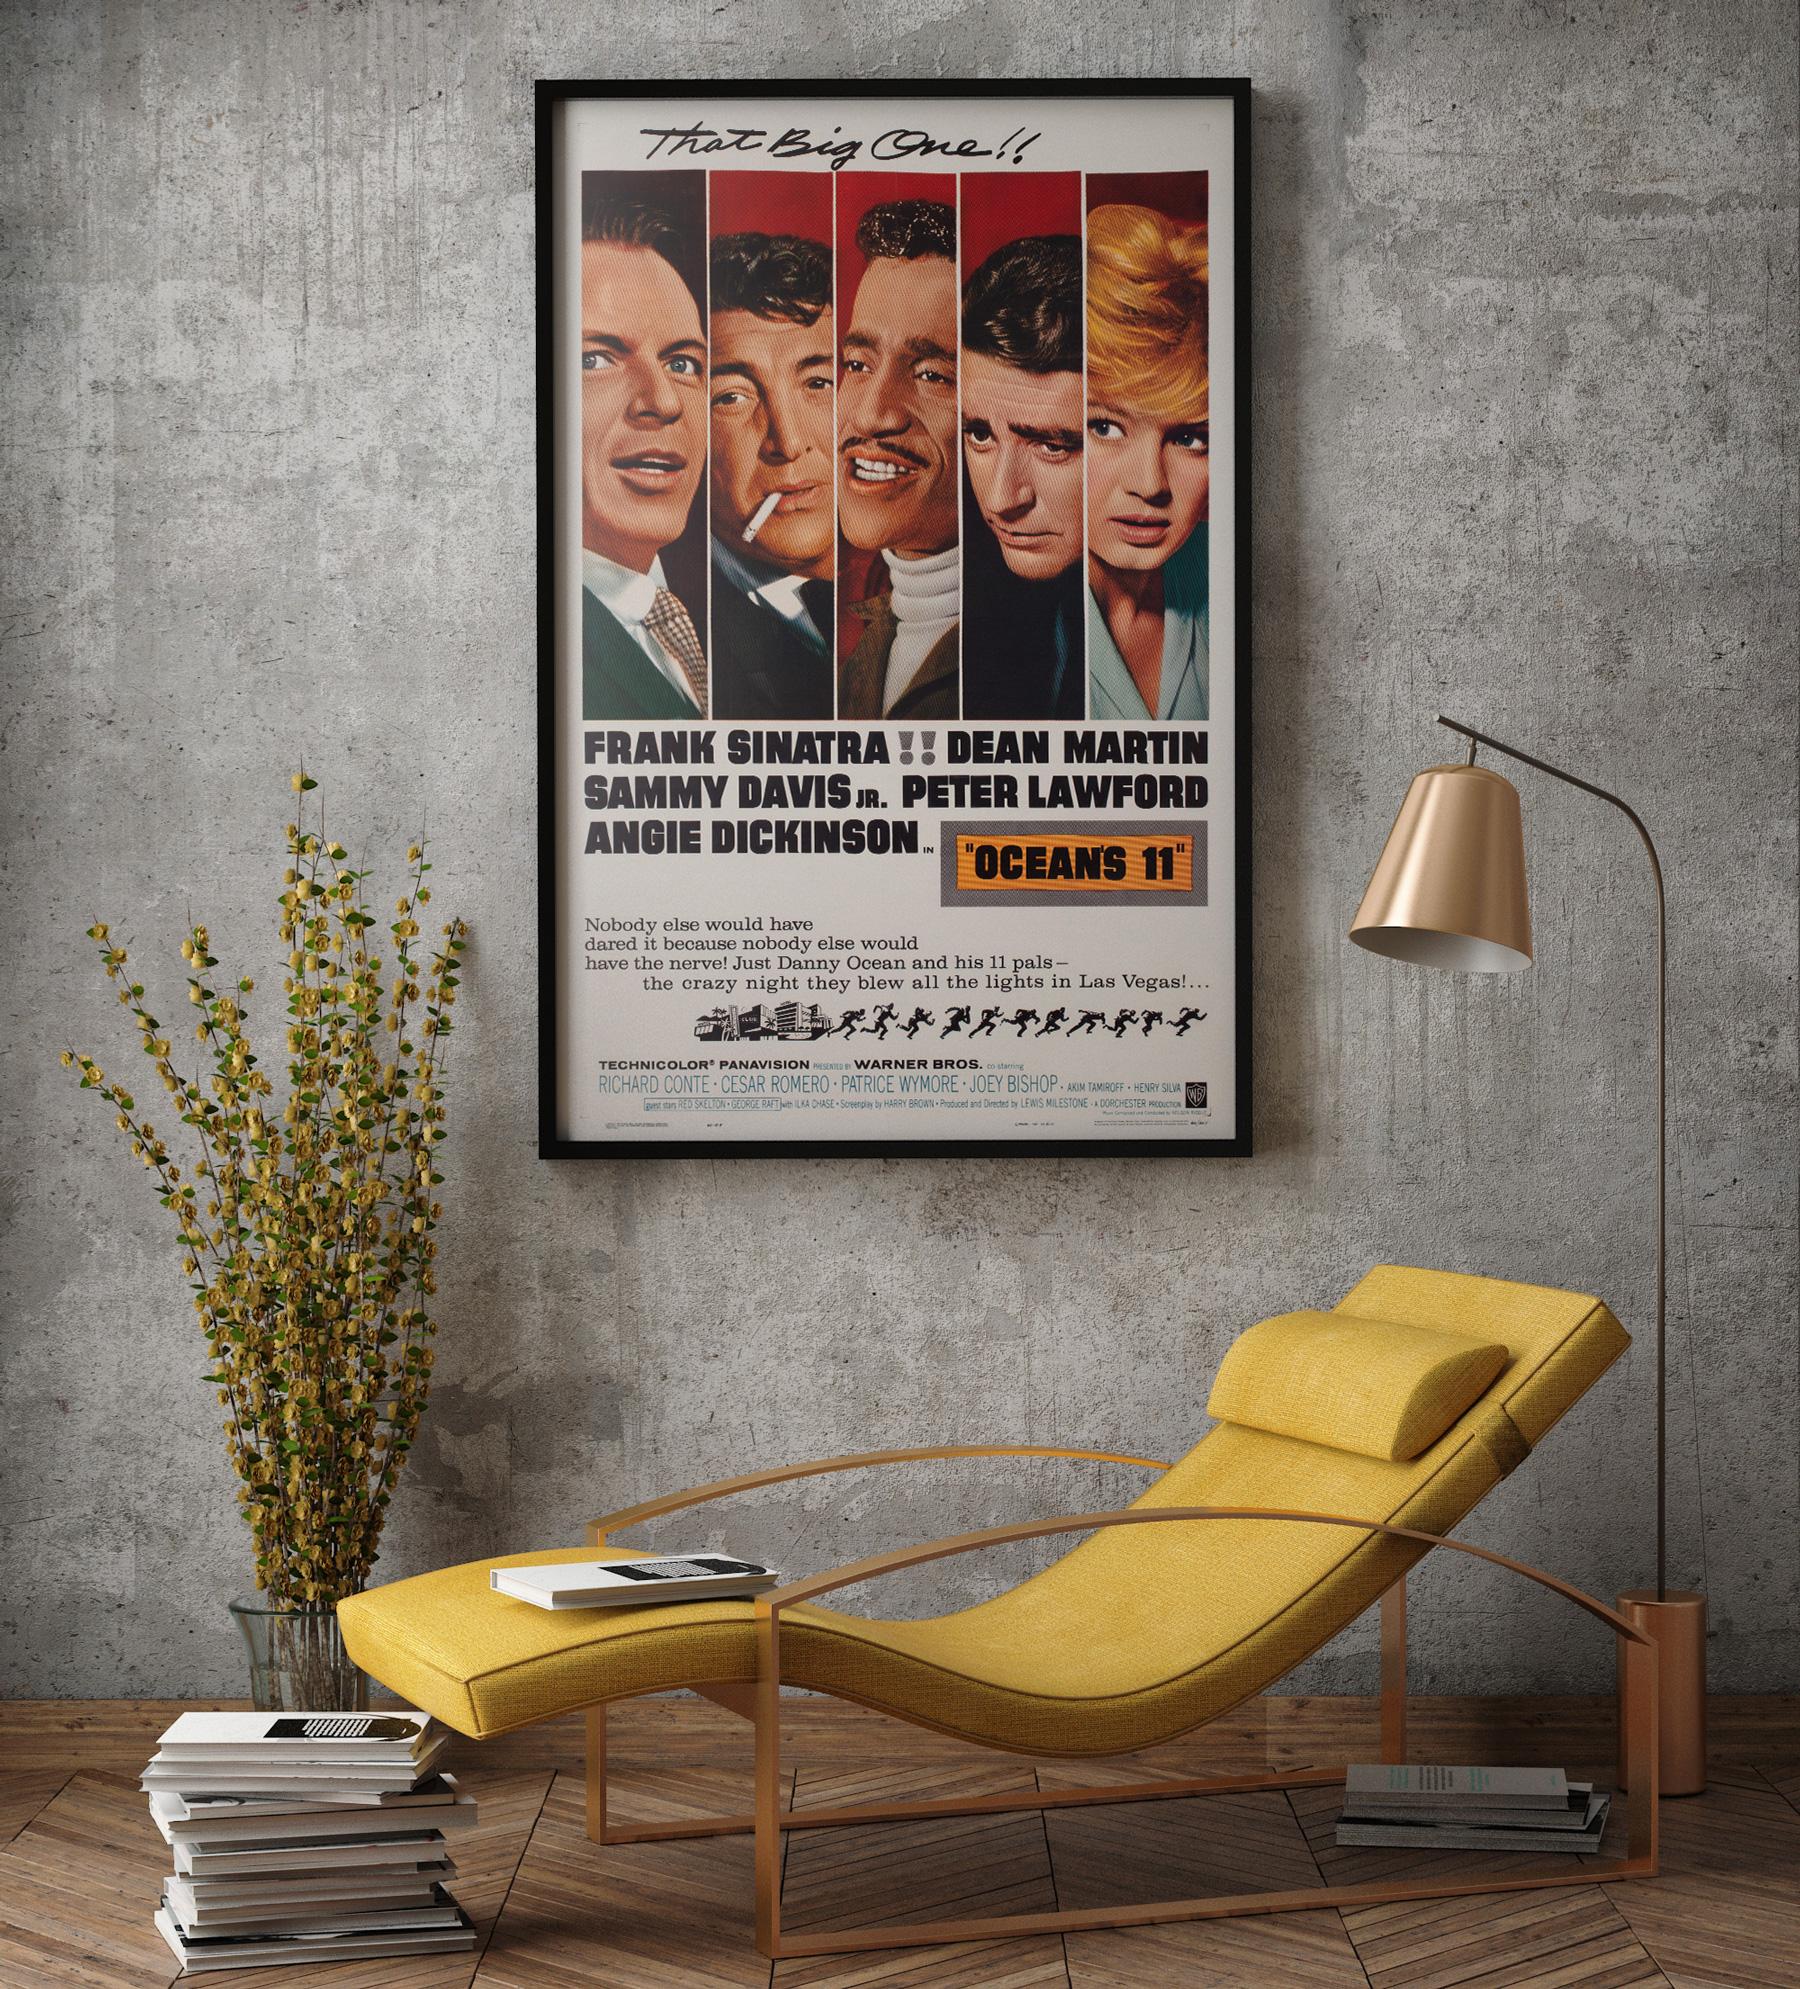 Stunning image of the Rat Pack features on the very cool Ocean's 11 US 1 Sheet film poster. 

This poster is one of the most sought-after titles of the genre and it is in fantastic linen-backed condition making it a very solid investment